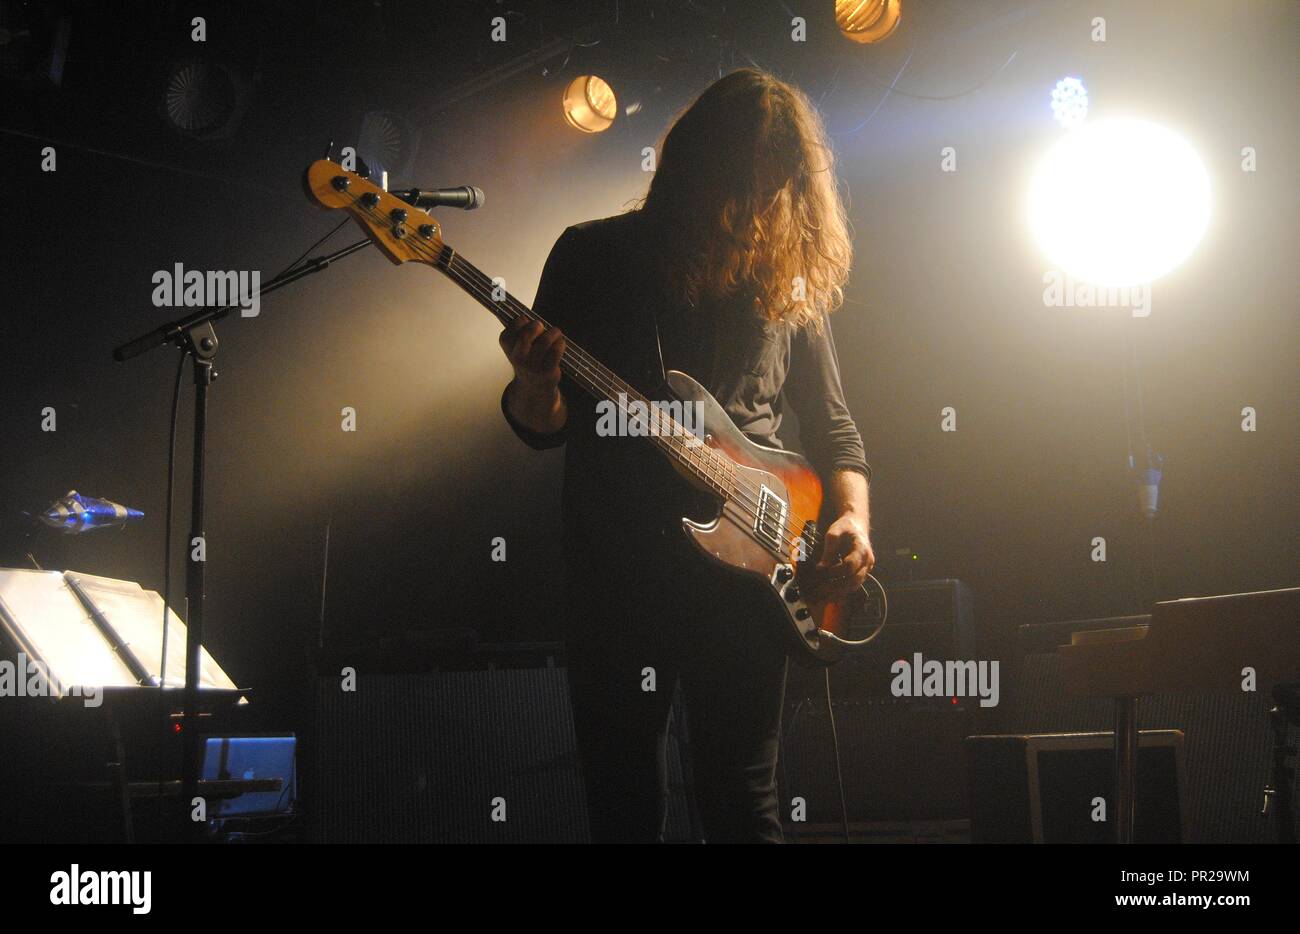 Nijmegen, The Netherlands - May 28, 2014. Bent Saether, bass guitarist and lead vocalist of Norwegian rock band Motorpsycho, on stage. Stock Photo